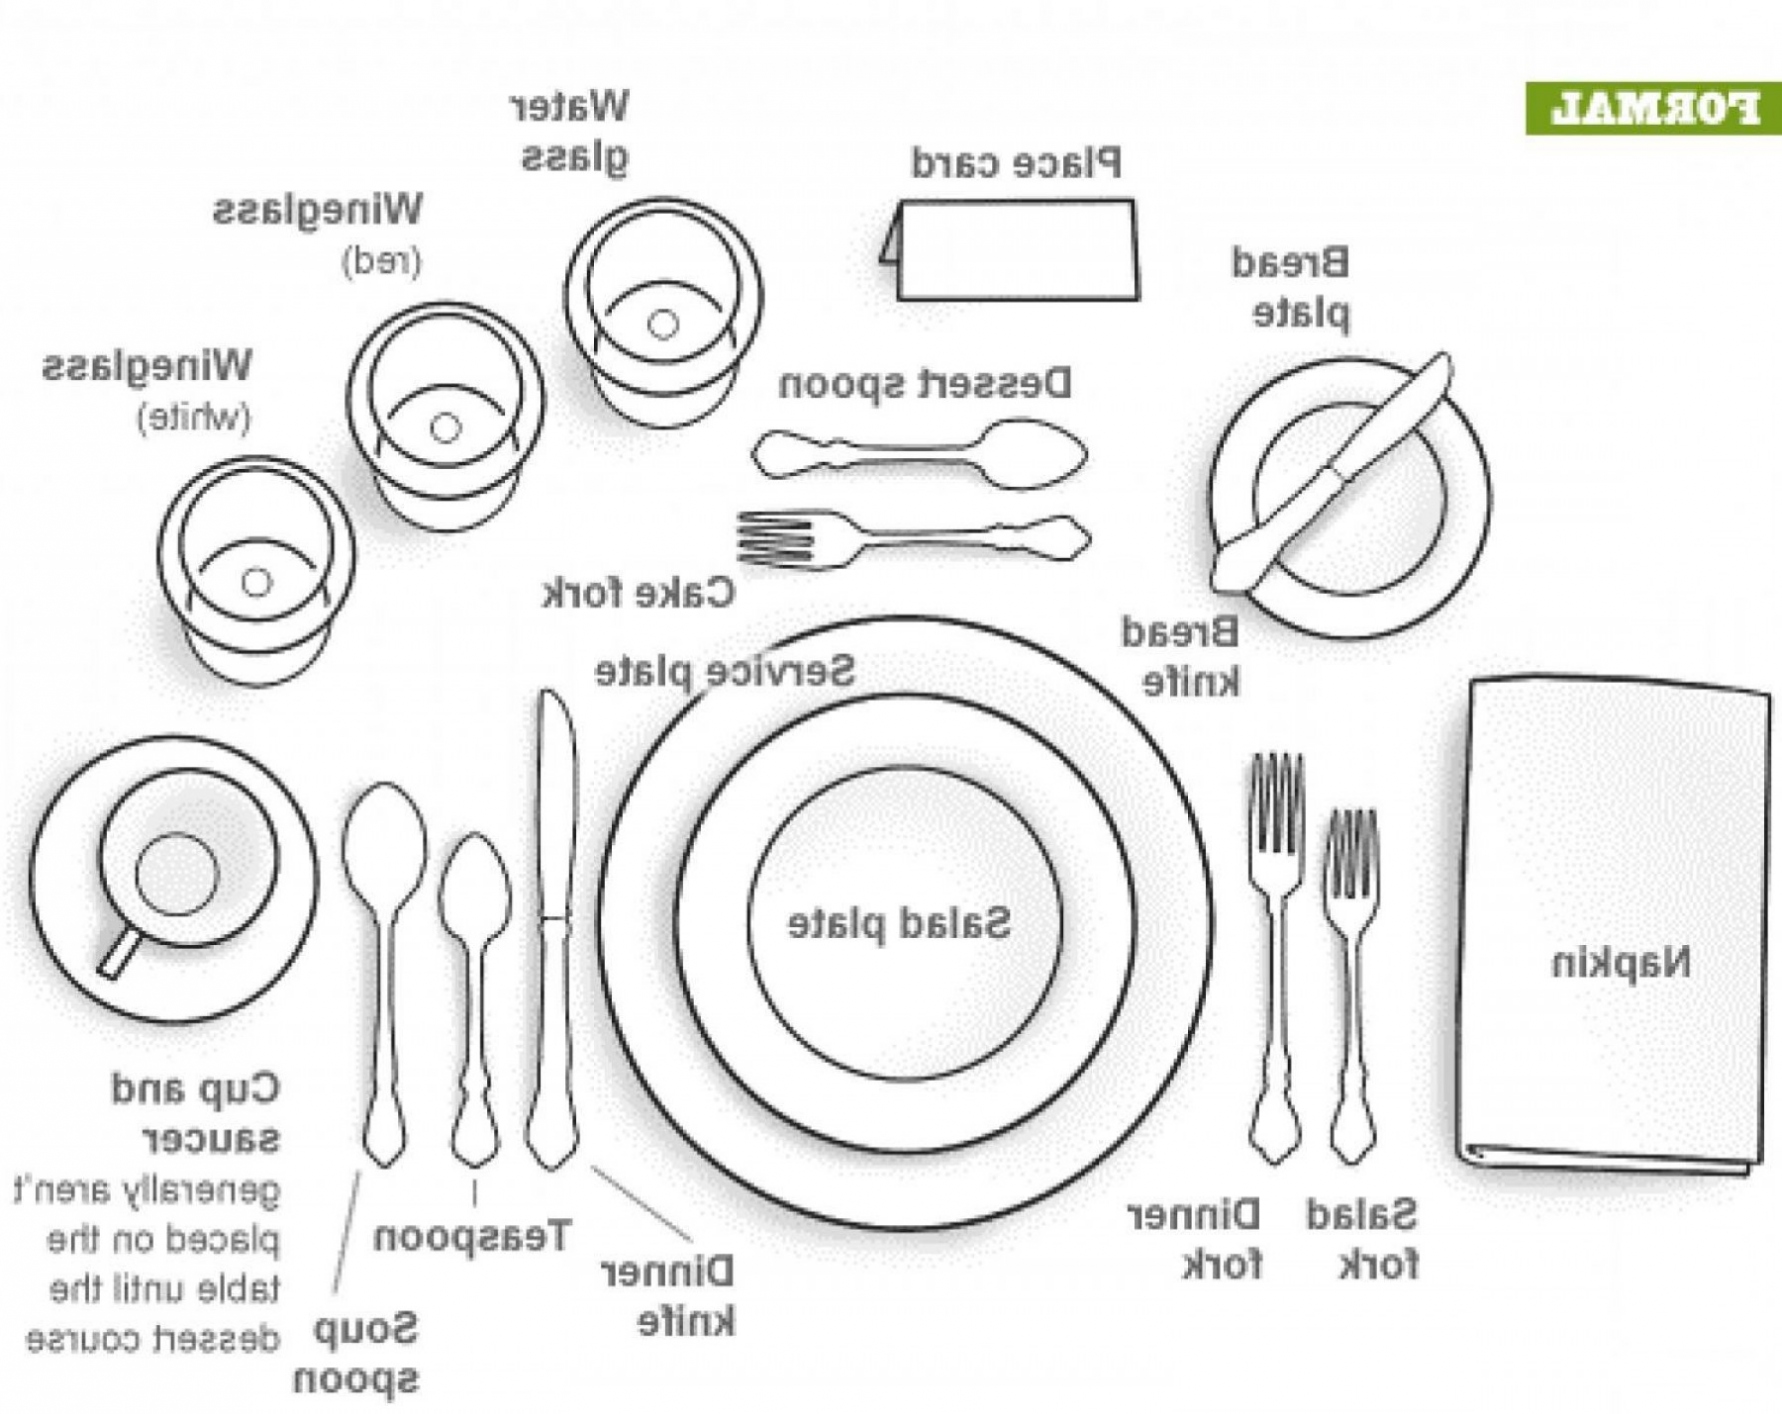 Table Setting Drawing at PaintingValley.com | Explore collection of ...